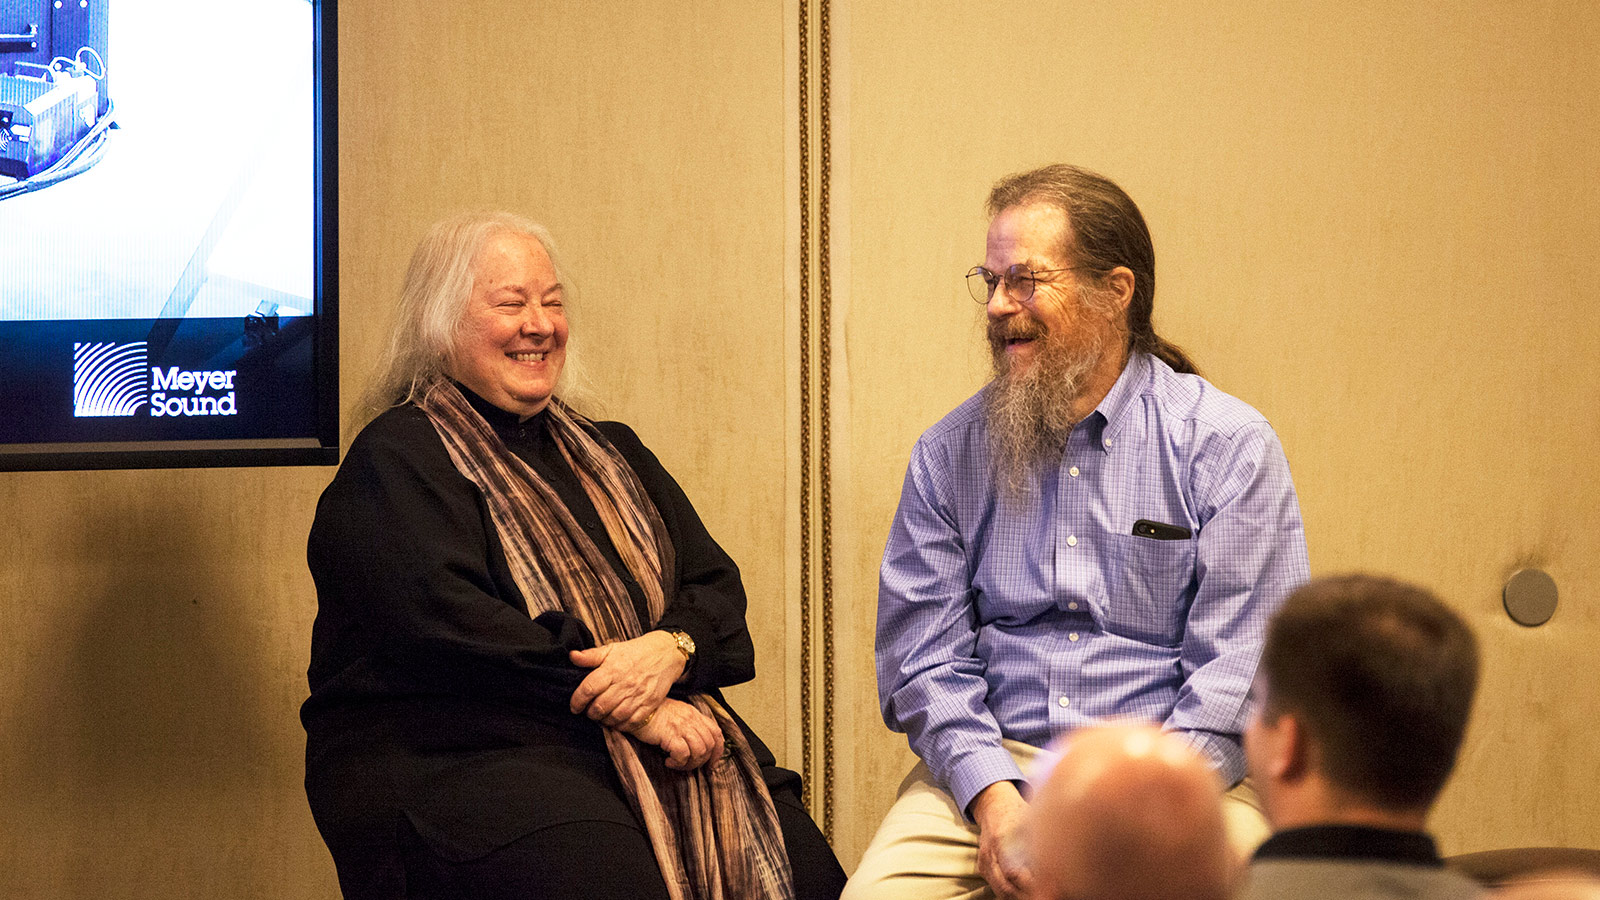 John and Helen join a panel during Meyer Sound’s ISE Customer Event